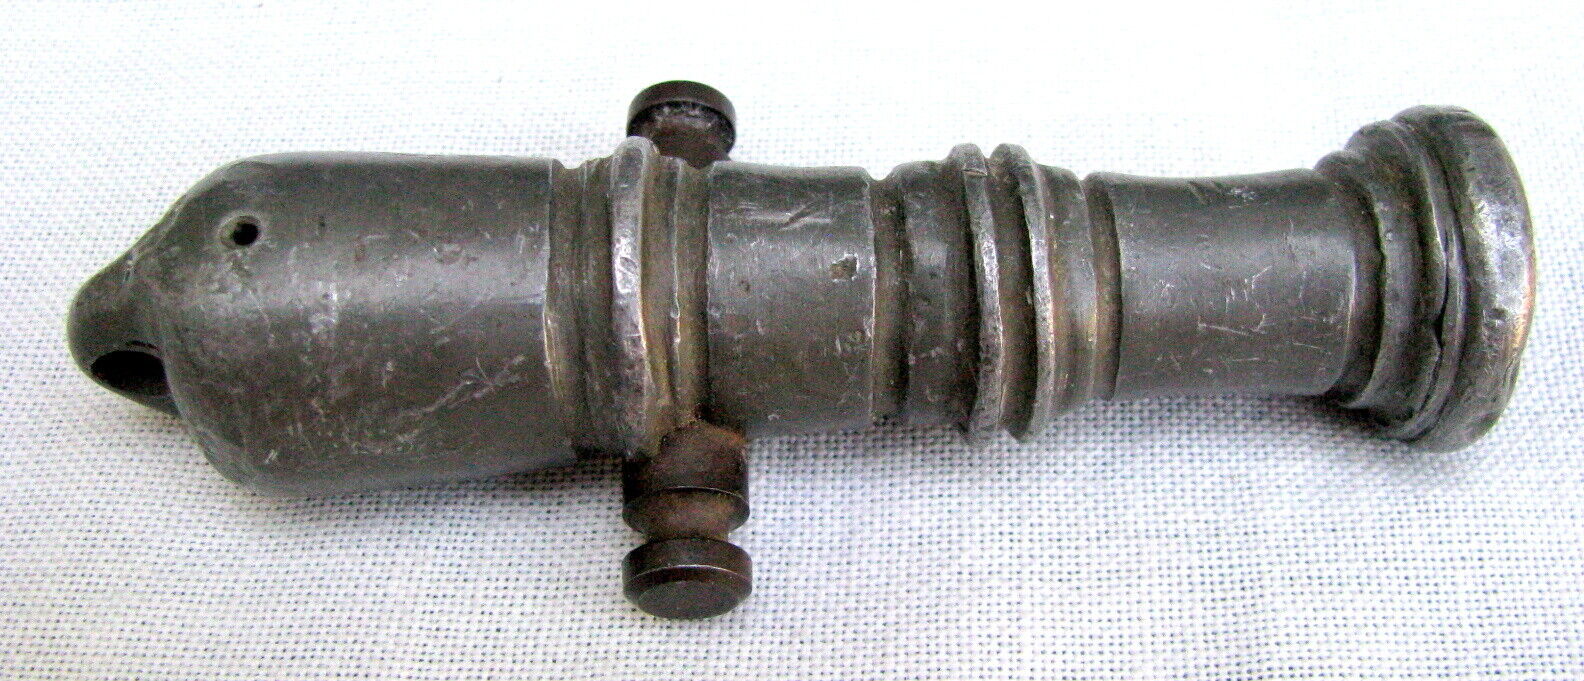 ANTIQUE UNUSUAL SMALL BOY’S TOY CAST PEWTER CANNON BARREL~ENGLISH c.1700's